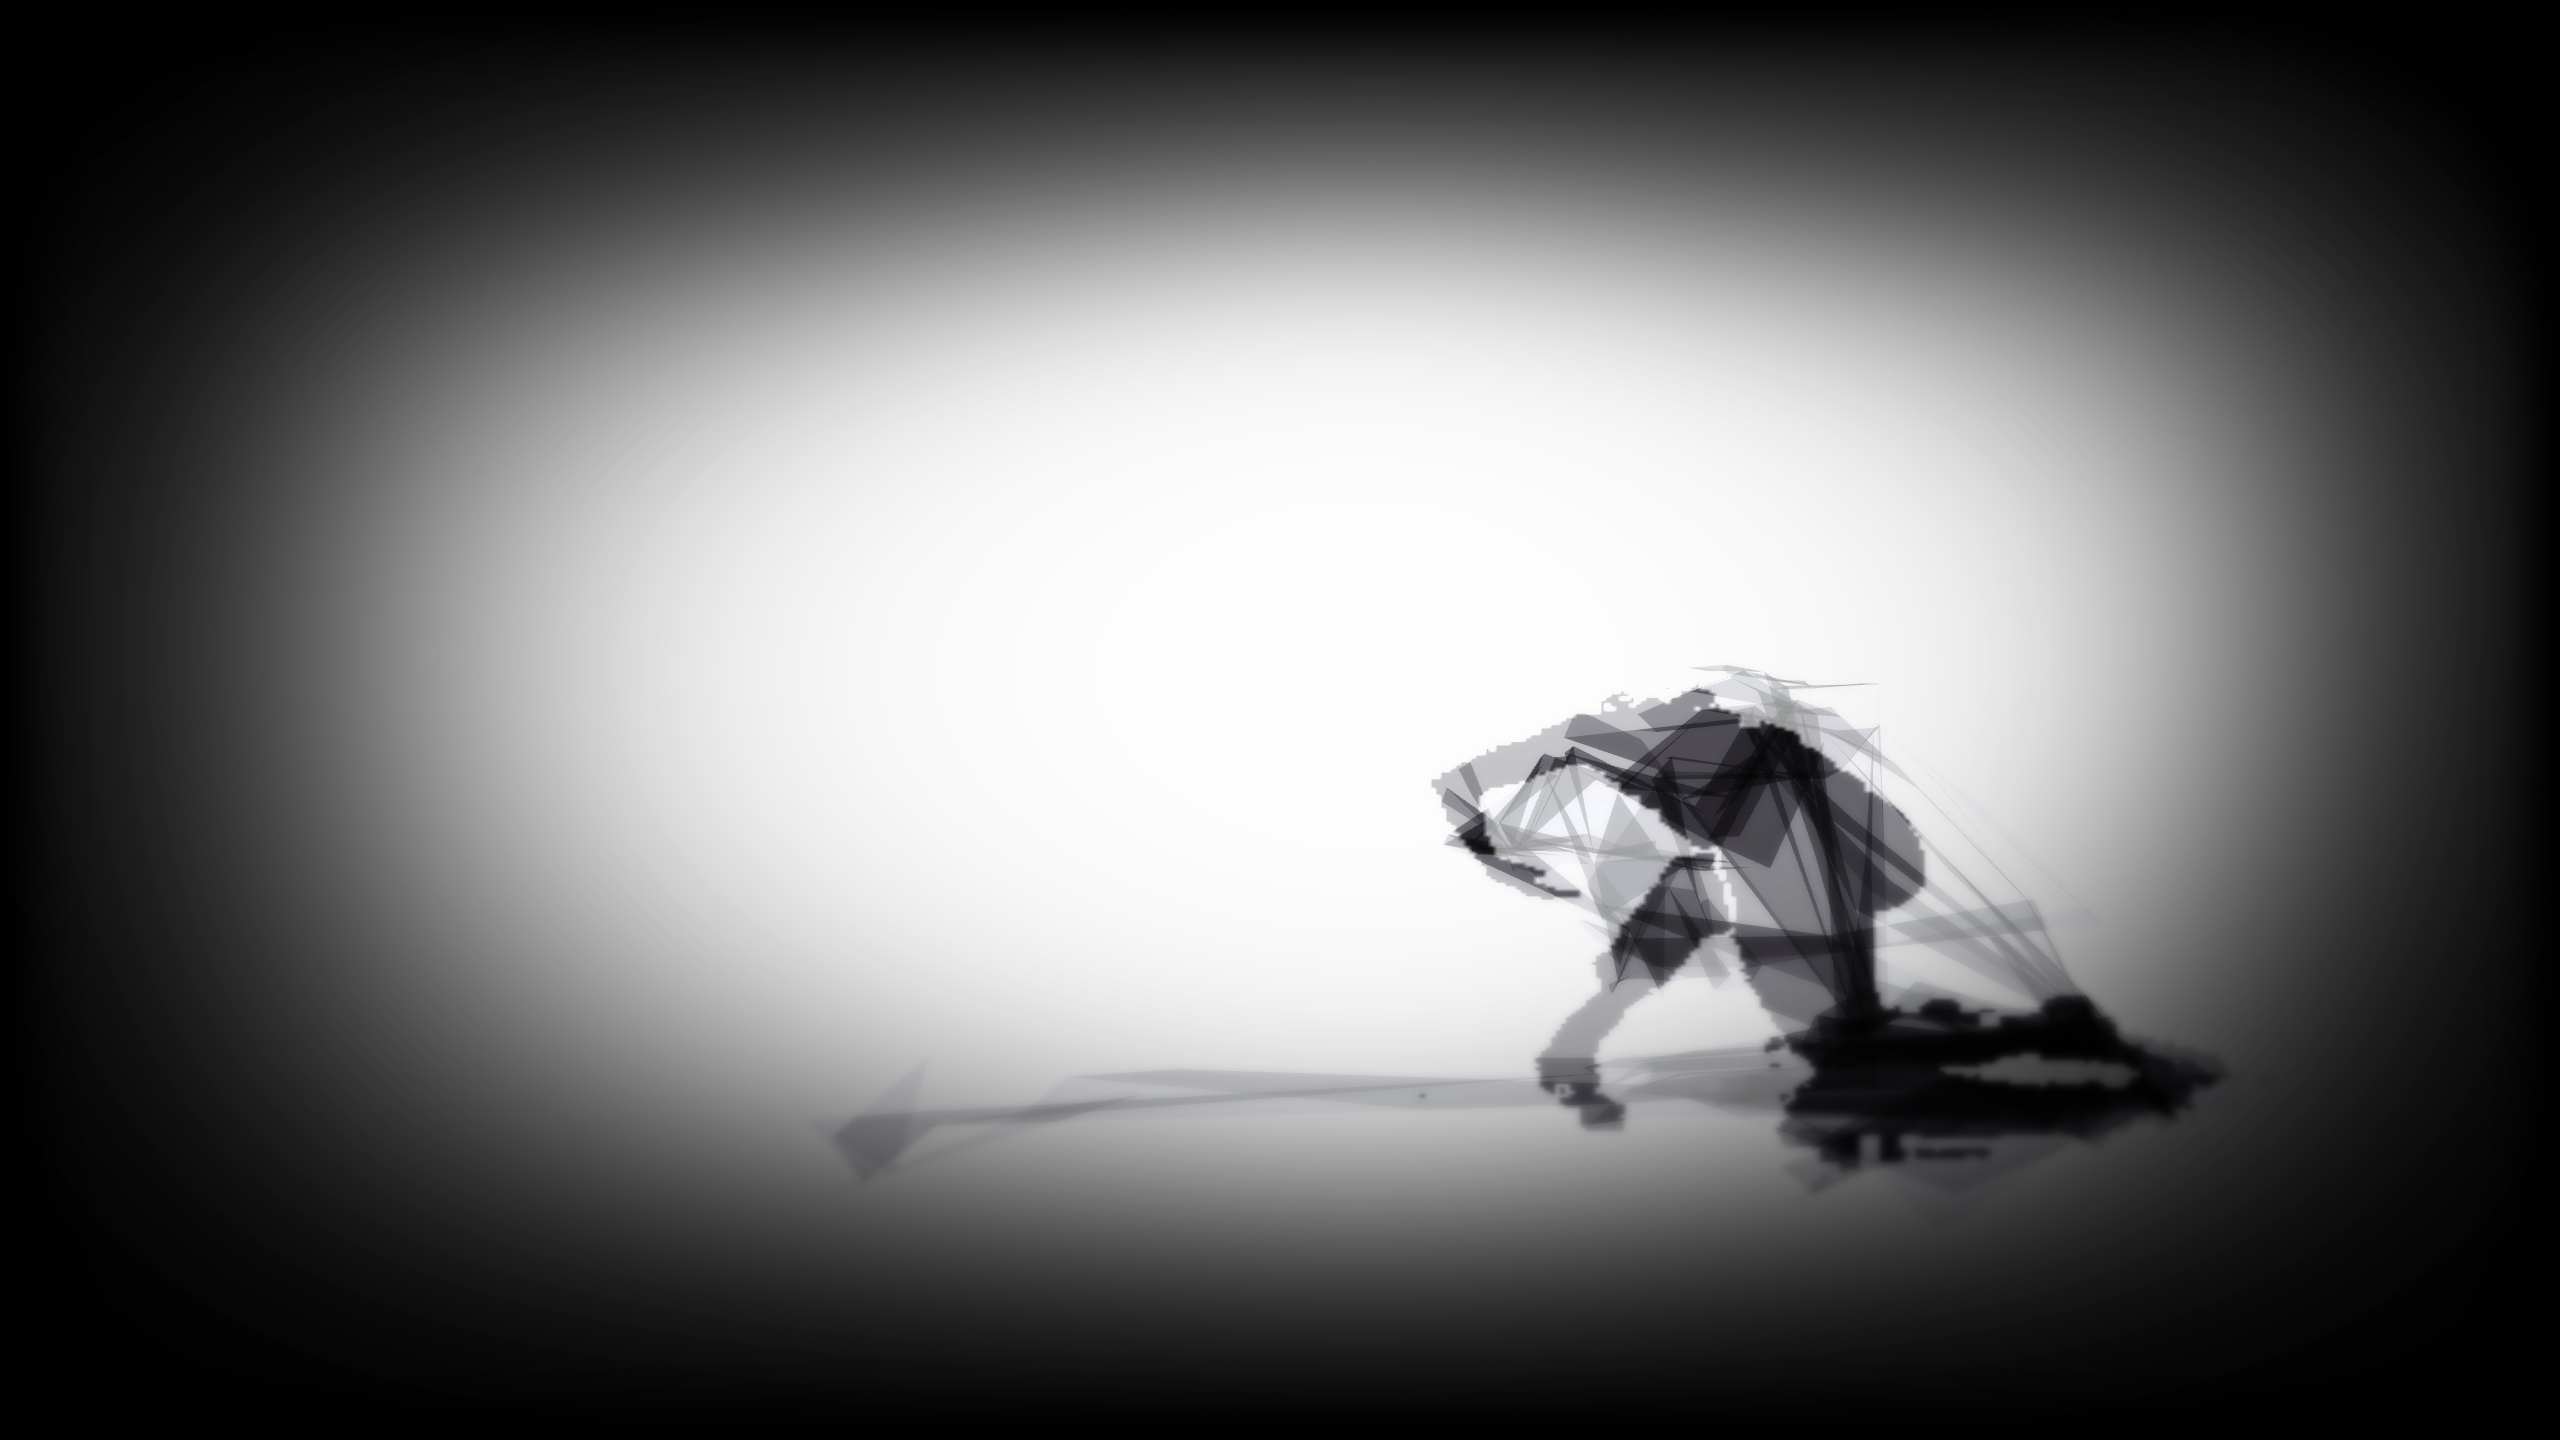 Screen grab of ephemeral grey polygonal trails and pixelated dancer silhouette on a light grey background as read from ESDC dancer movment.